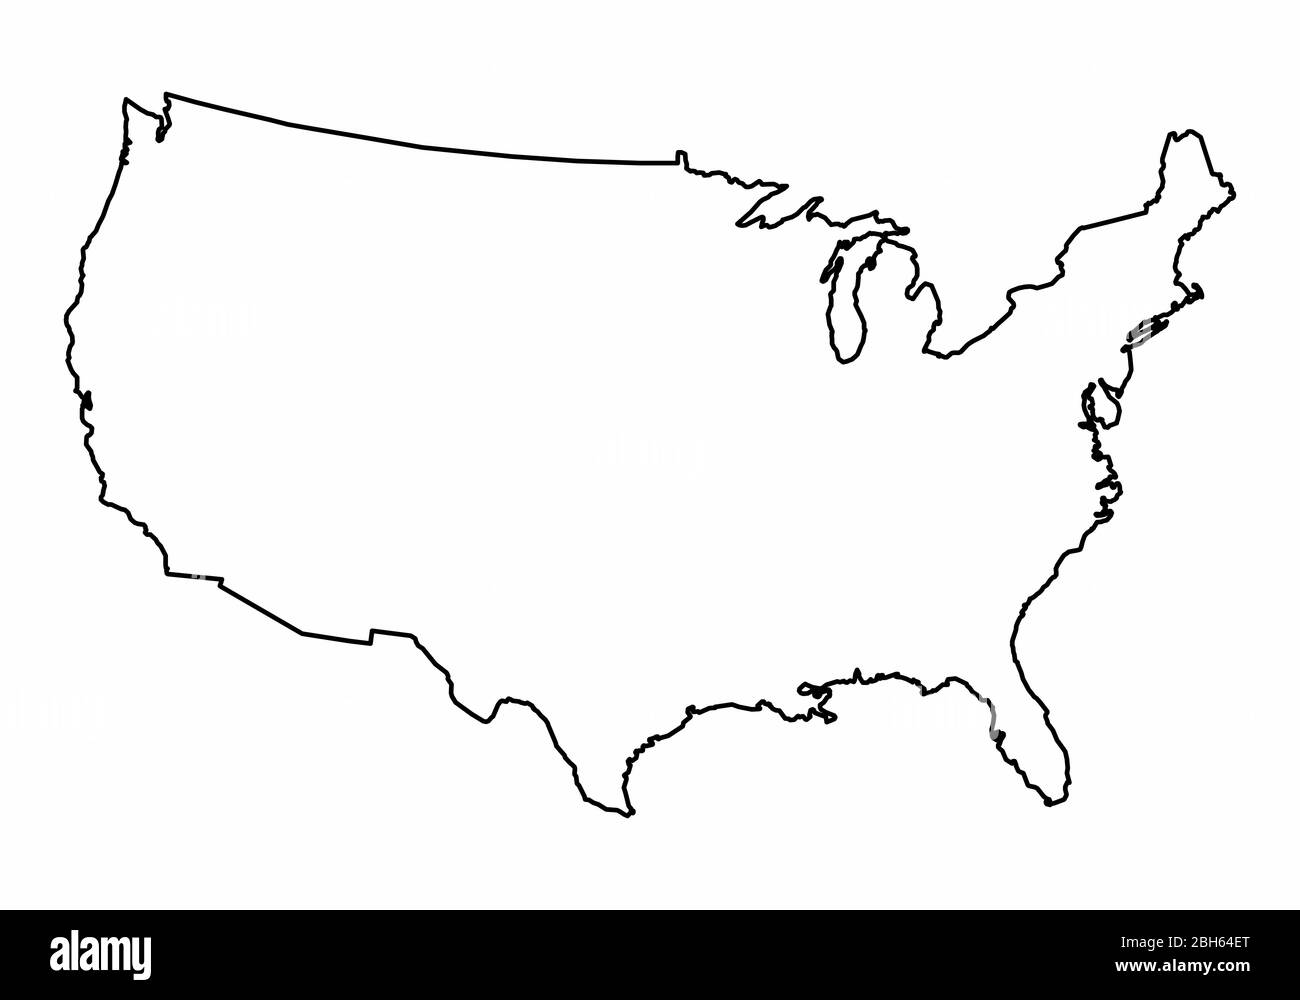 usa outline map isolated on white background stock vector image art alamy